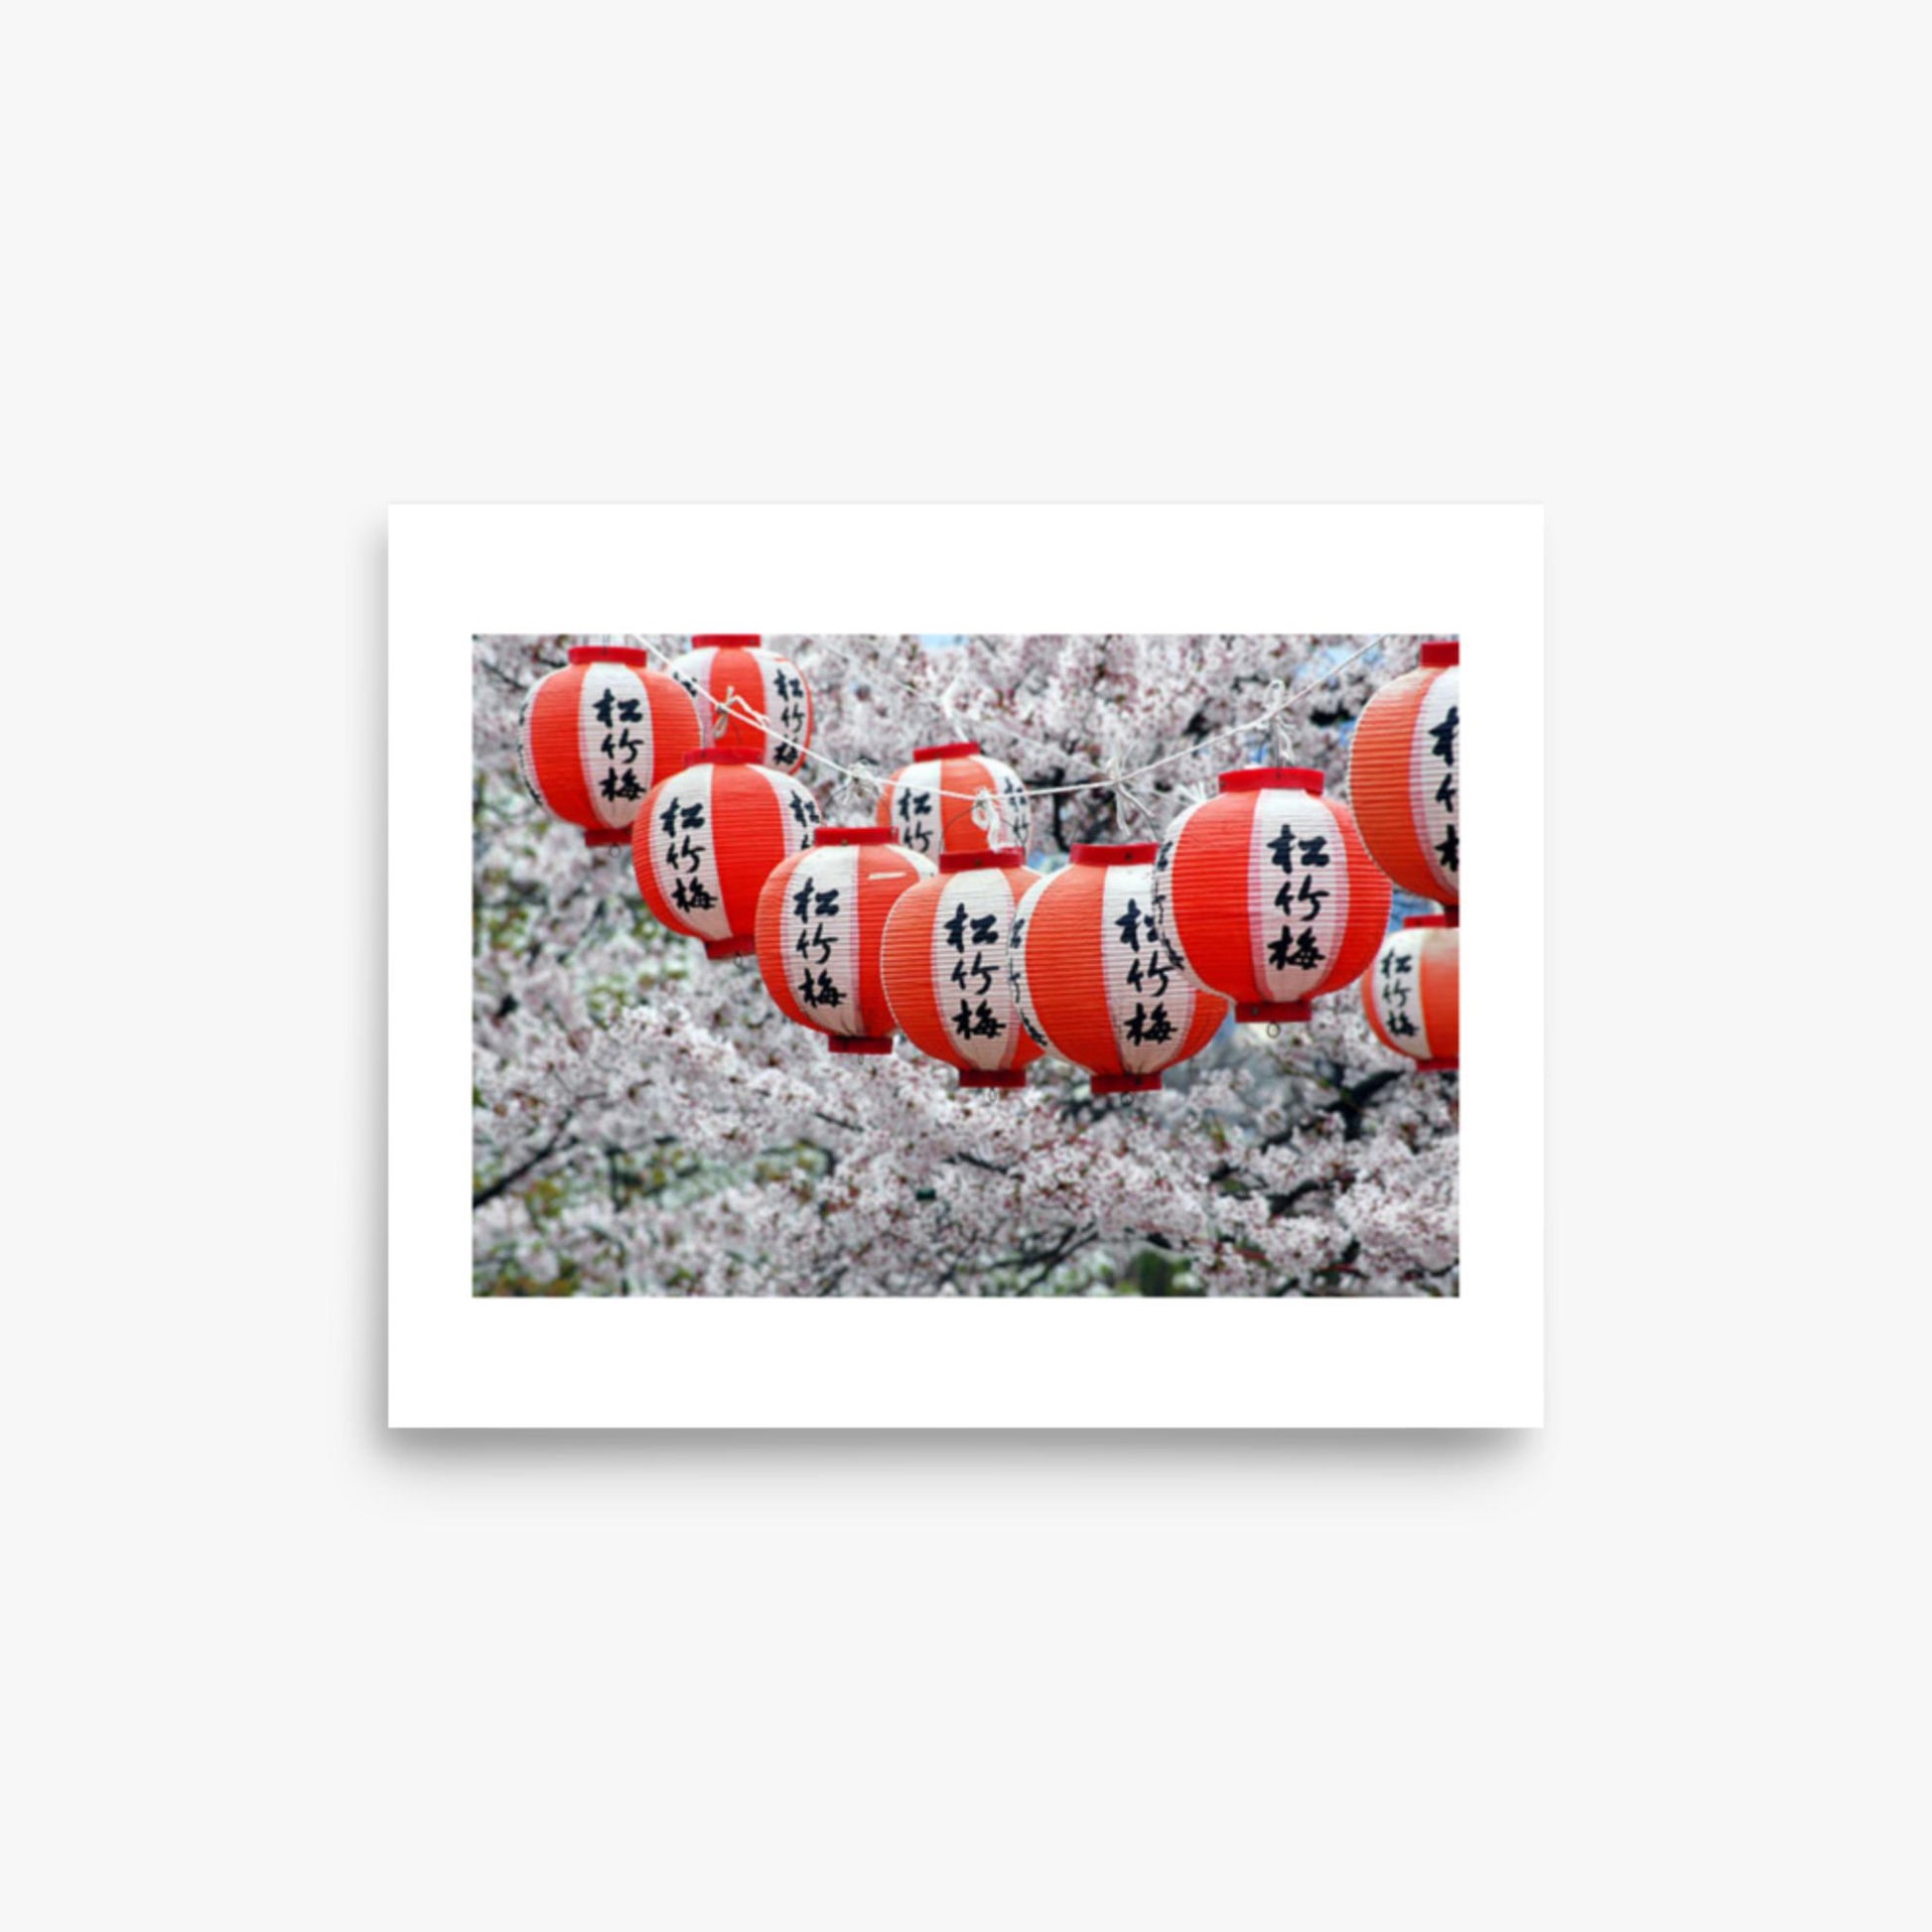 Japanese Lanterns and Cherry Blossom, Kyoto, Japan 8x10 in Poster